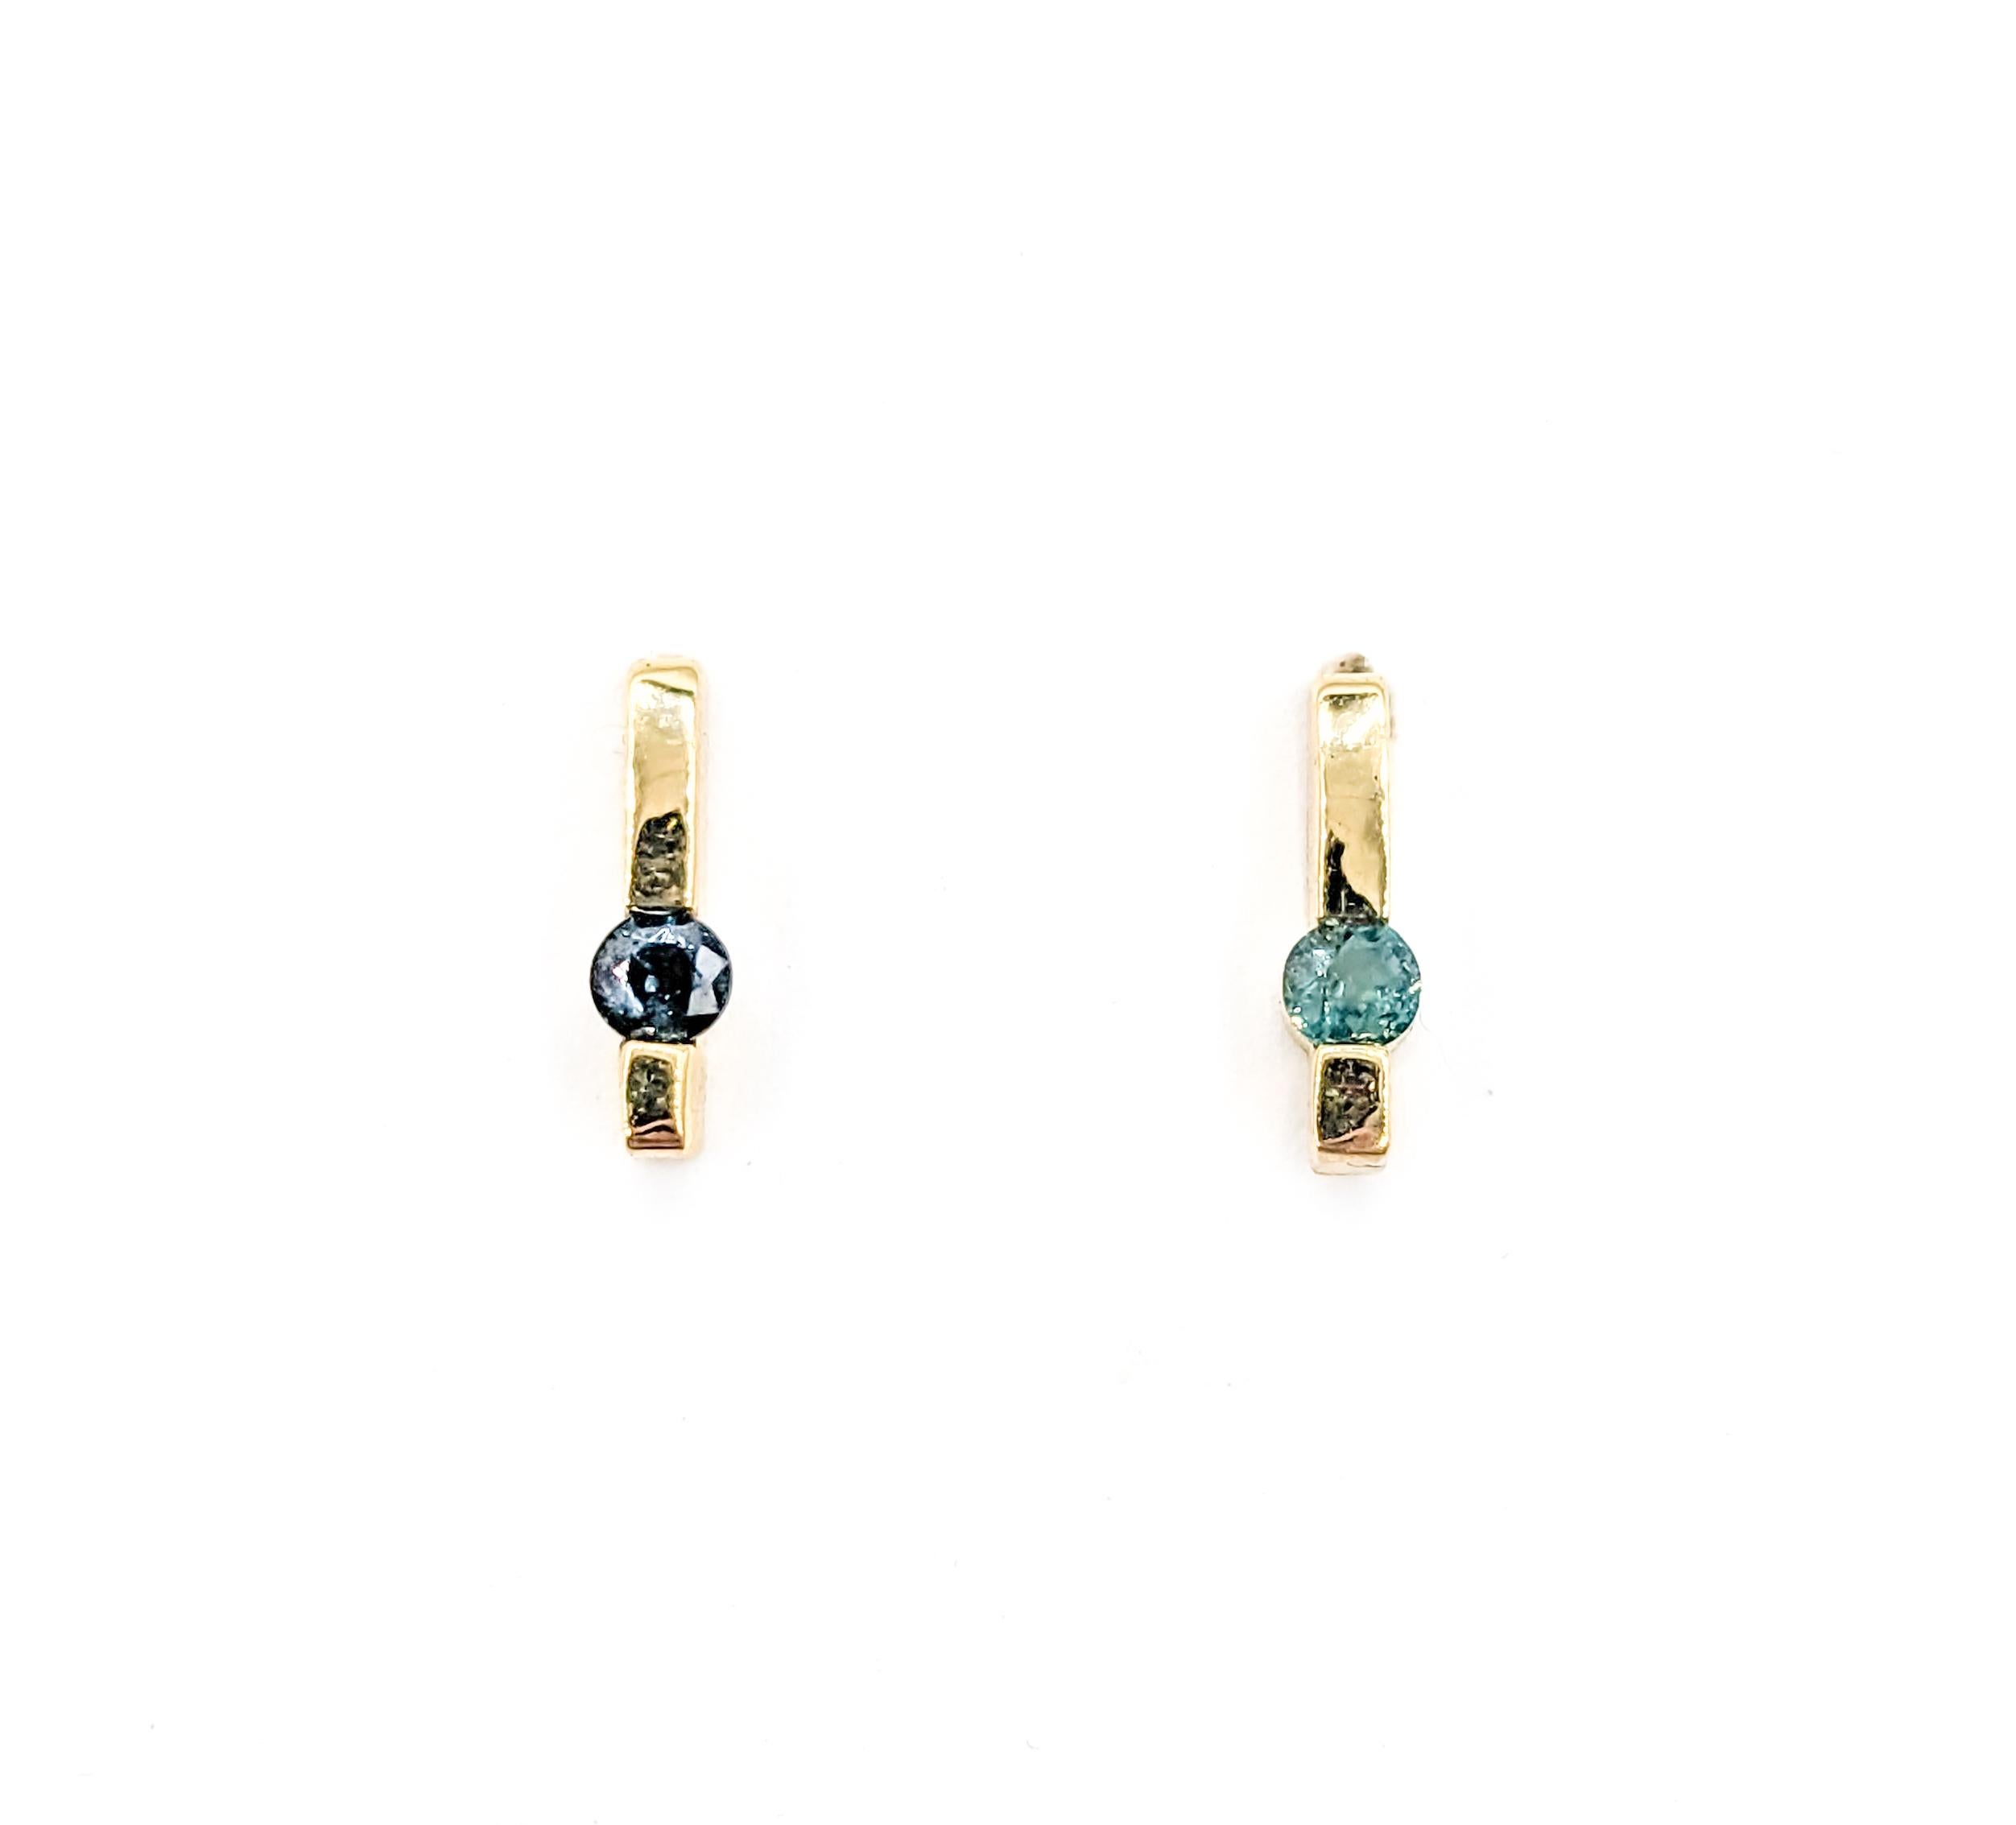 Natural Alexandrite Earrings In Yellow Gold

Introducing these exquisite earrings, crafted in radiant 14kt yellow gold, featuring classic studs undefined clarity. These earrings are further adorned with .27ctw of captivating Brazilian Alexandrite,